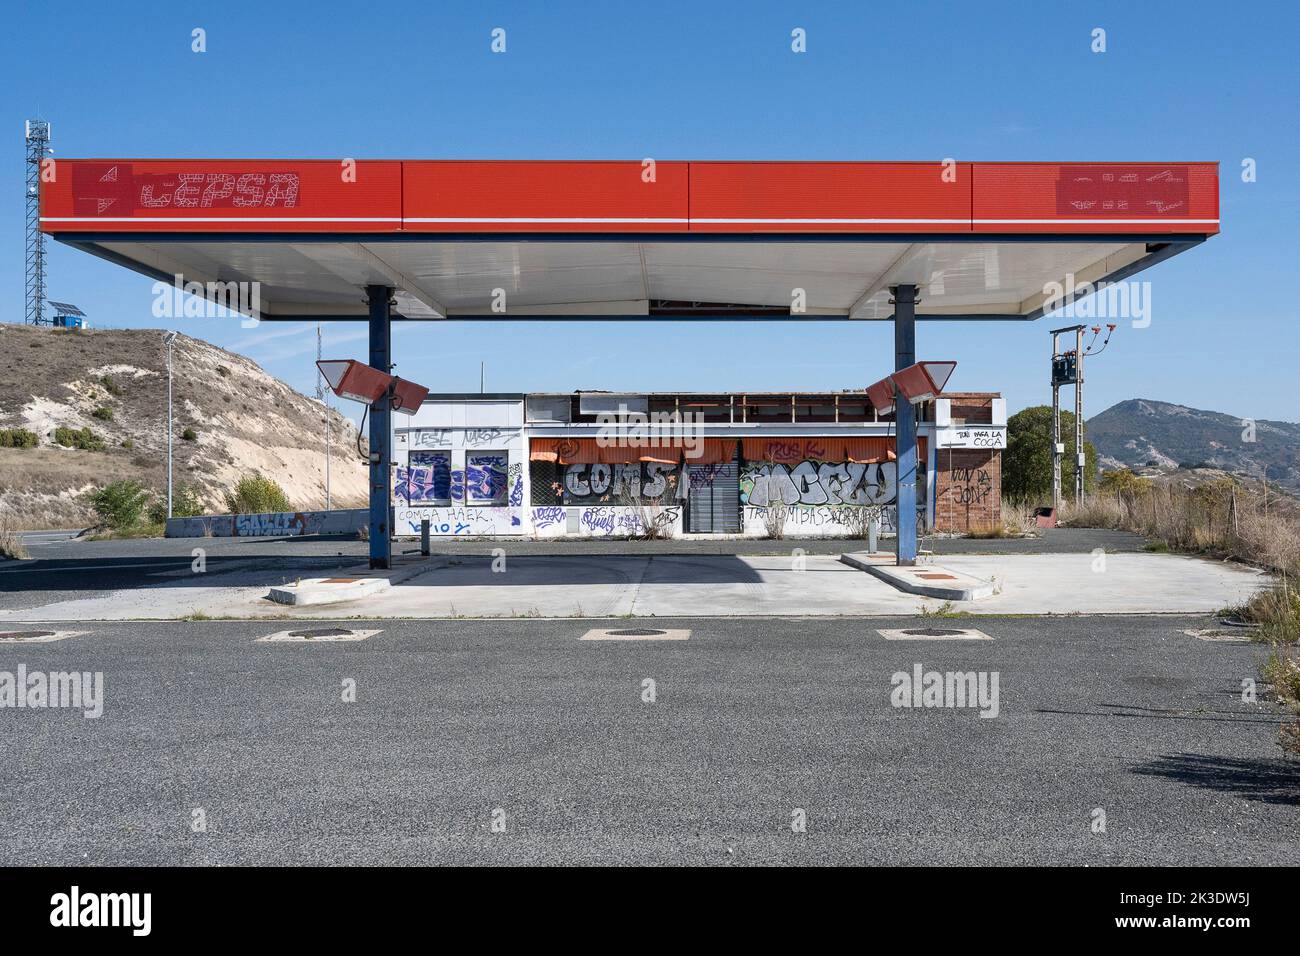 Spain, Castile and León: abandoned gas station in Bugedo Stock Photo